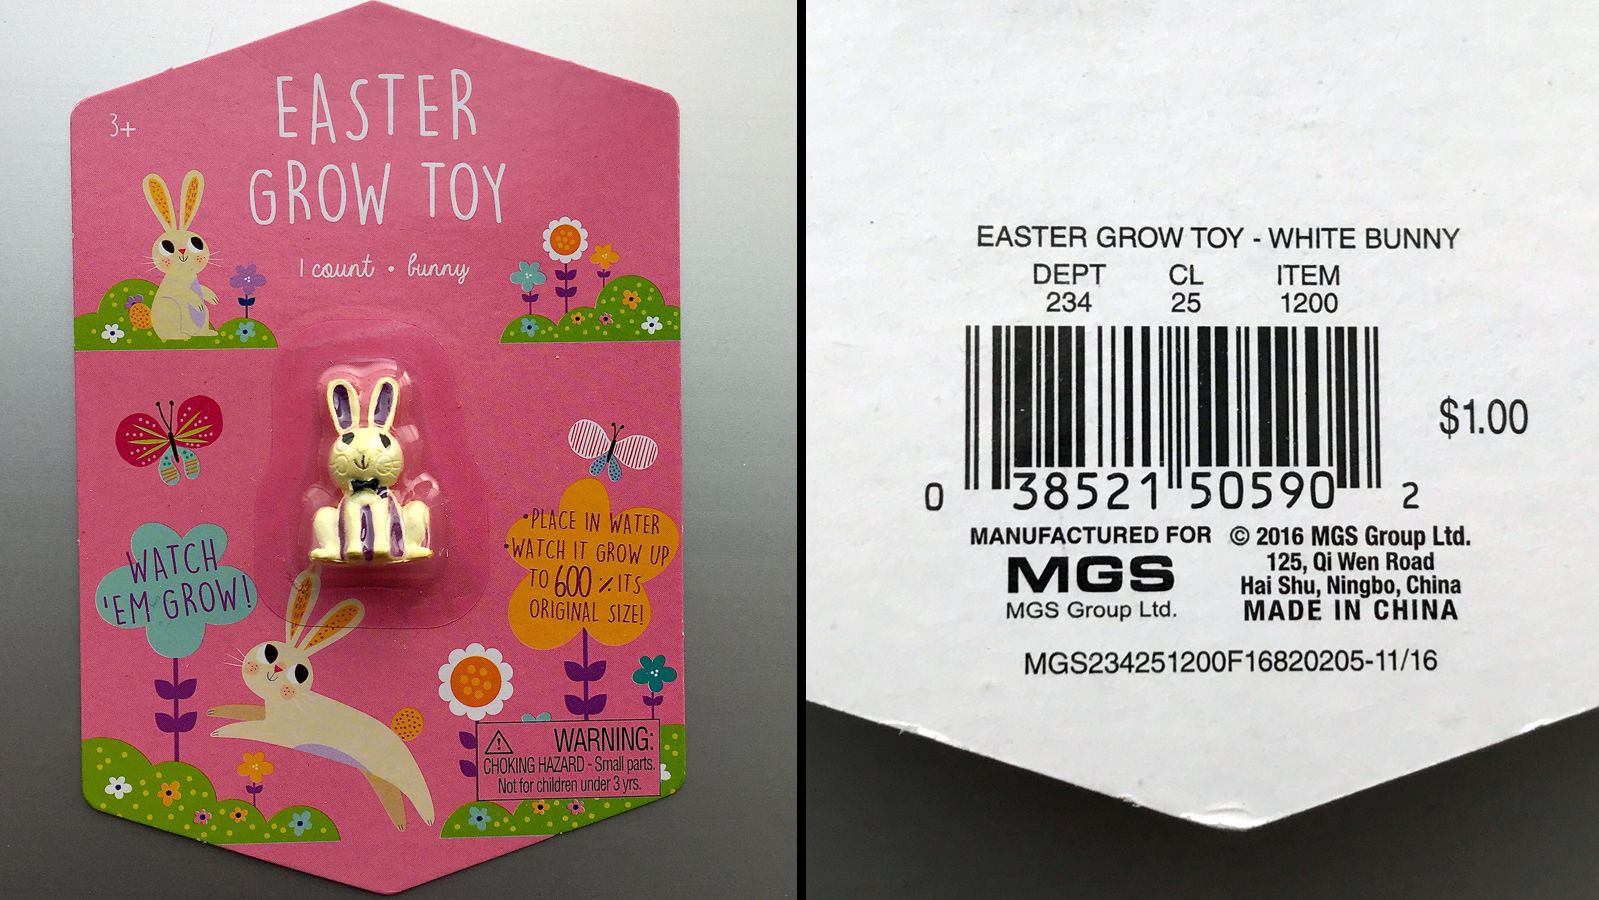 Easter Grow toys with model number 234-25-1200 are recalled.